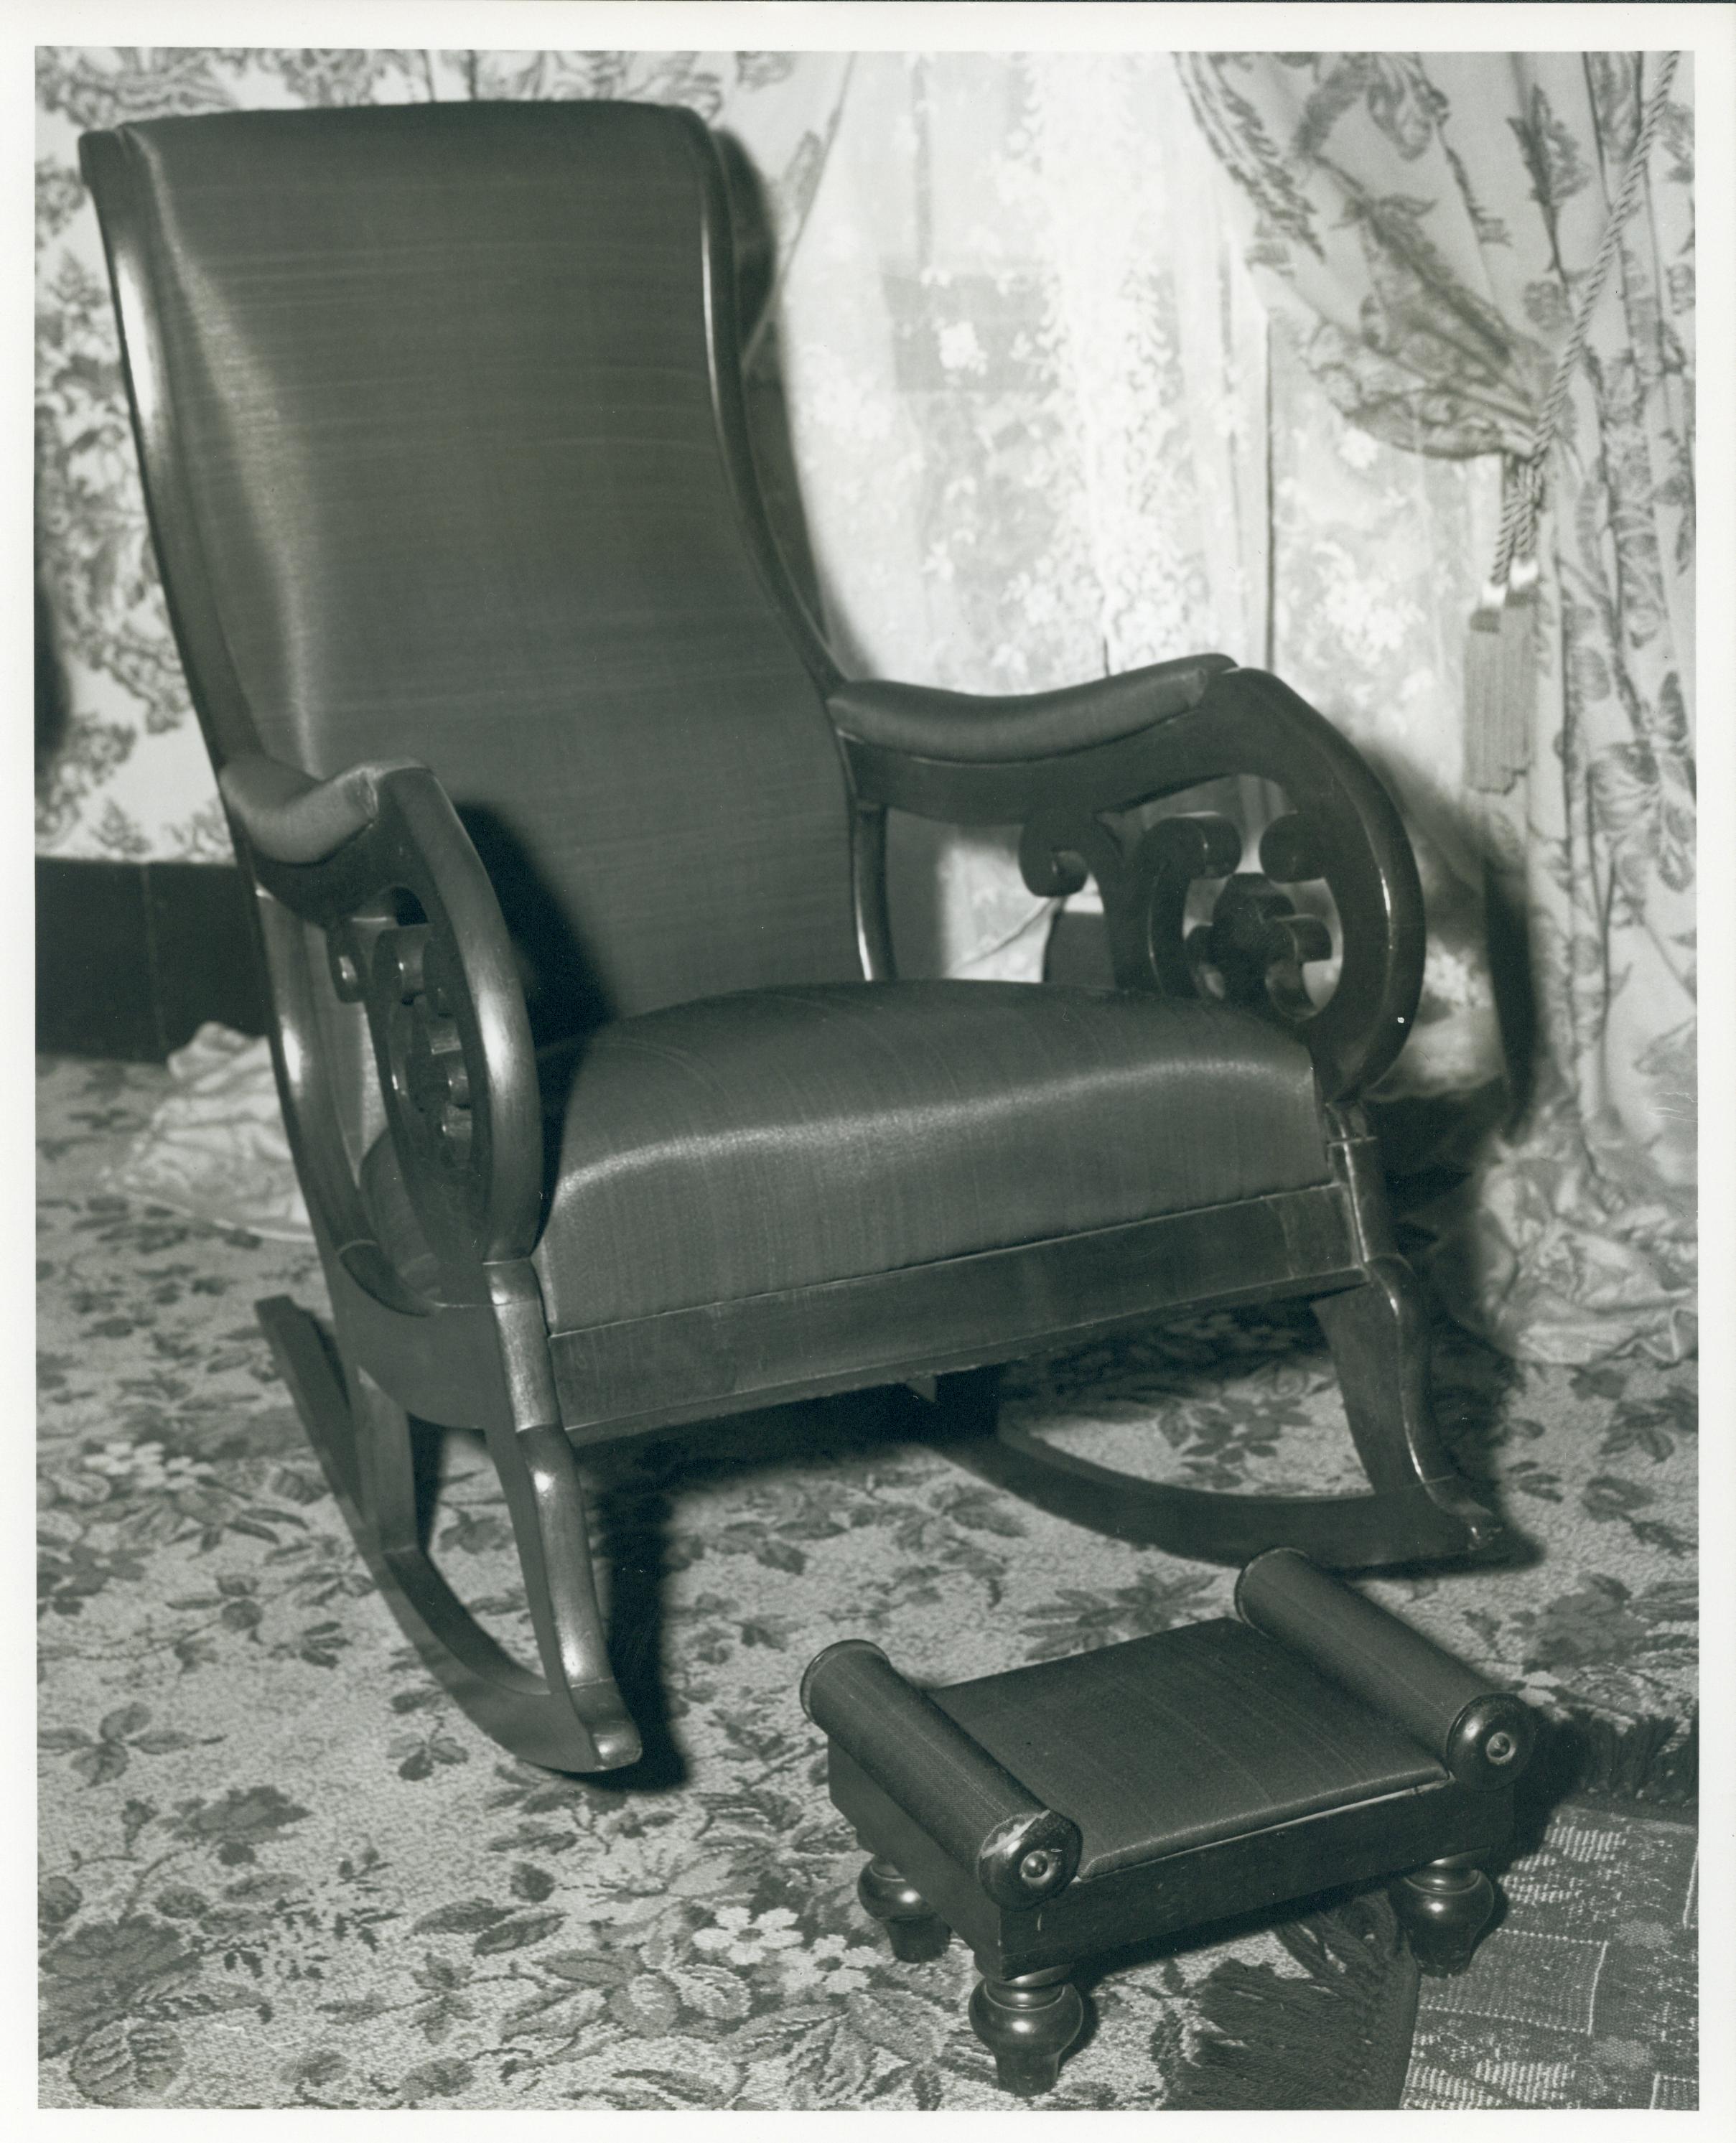 Lincoln's Chair - Sitting Room Print #: 1423-8 Lincoln, Home, sitting, room, artifacts, chair